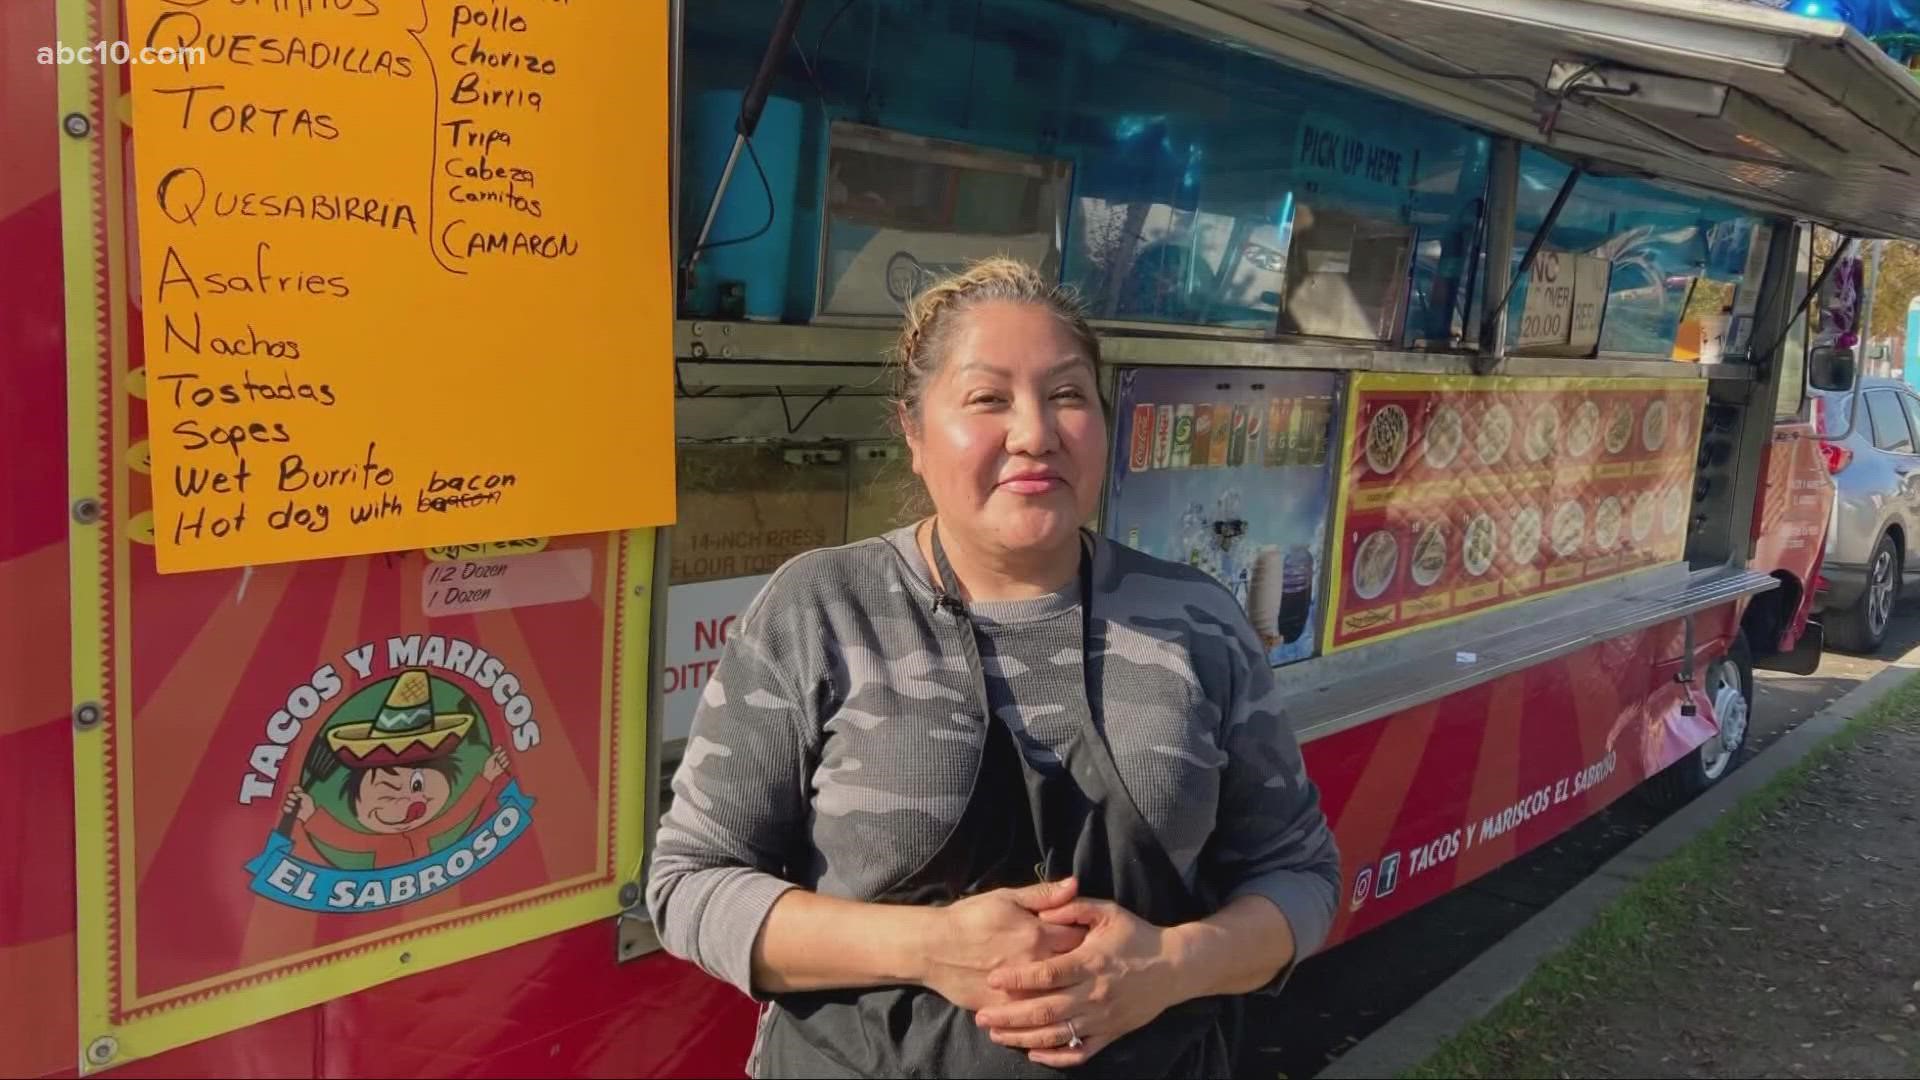 Erica Soriano worked years cooking for others but now is her own taco truck boss.